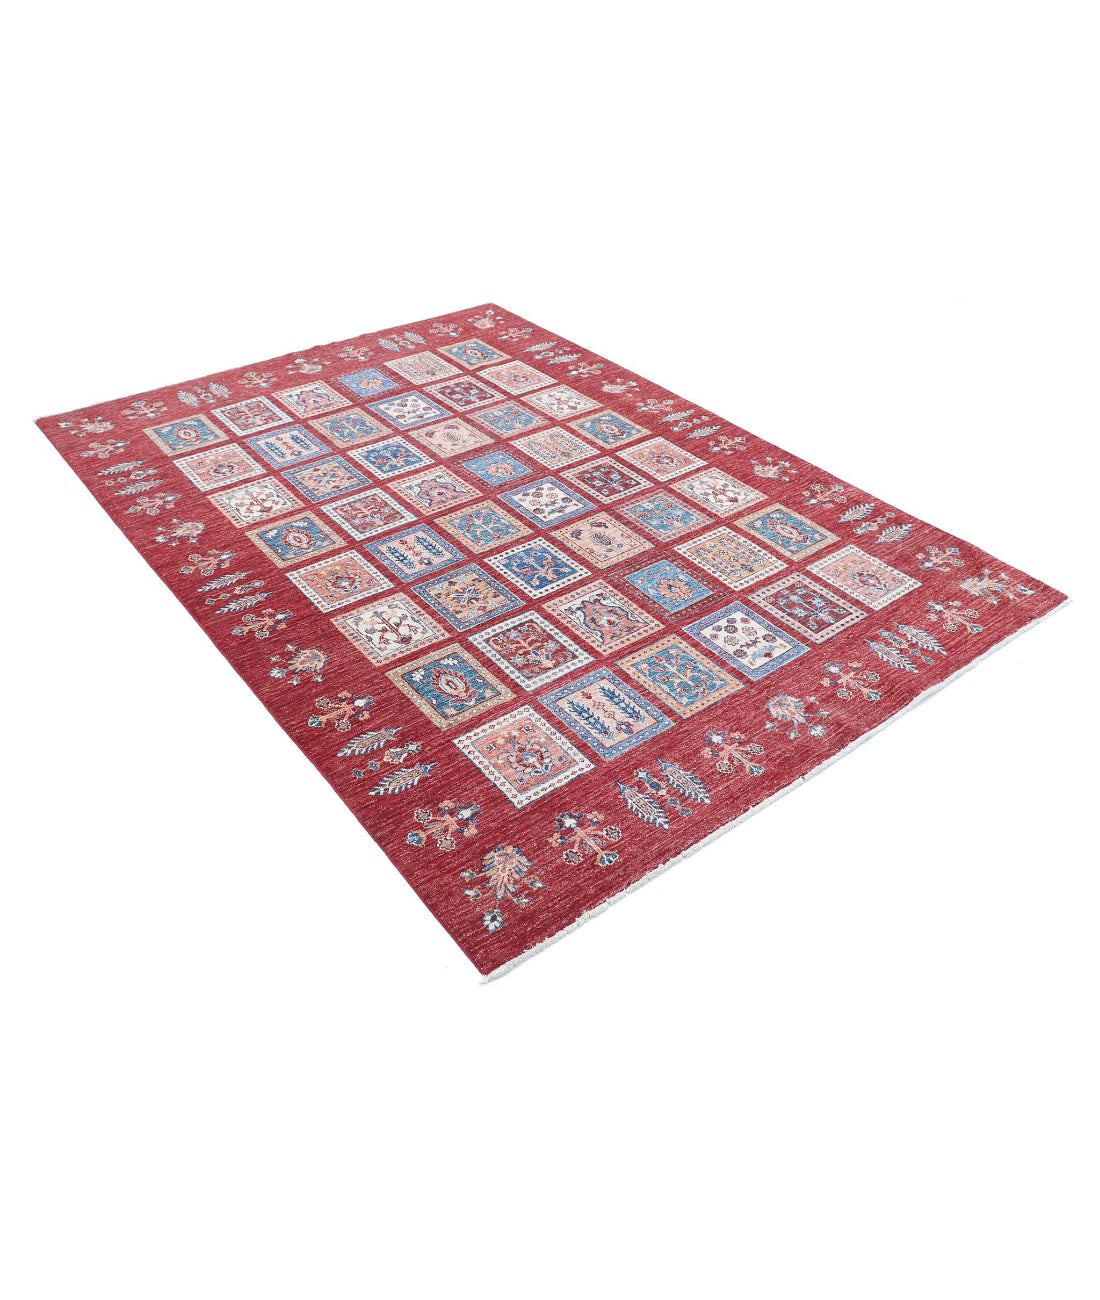 Hand Knotted Bakhtiari Wool Rug - 5'6'' x 7'6'' 5'6'' x 7'6'' (165 X 225) / Red / Red